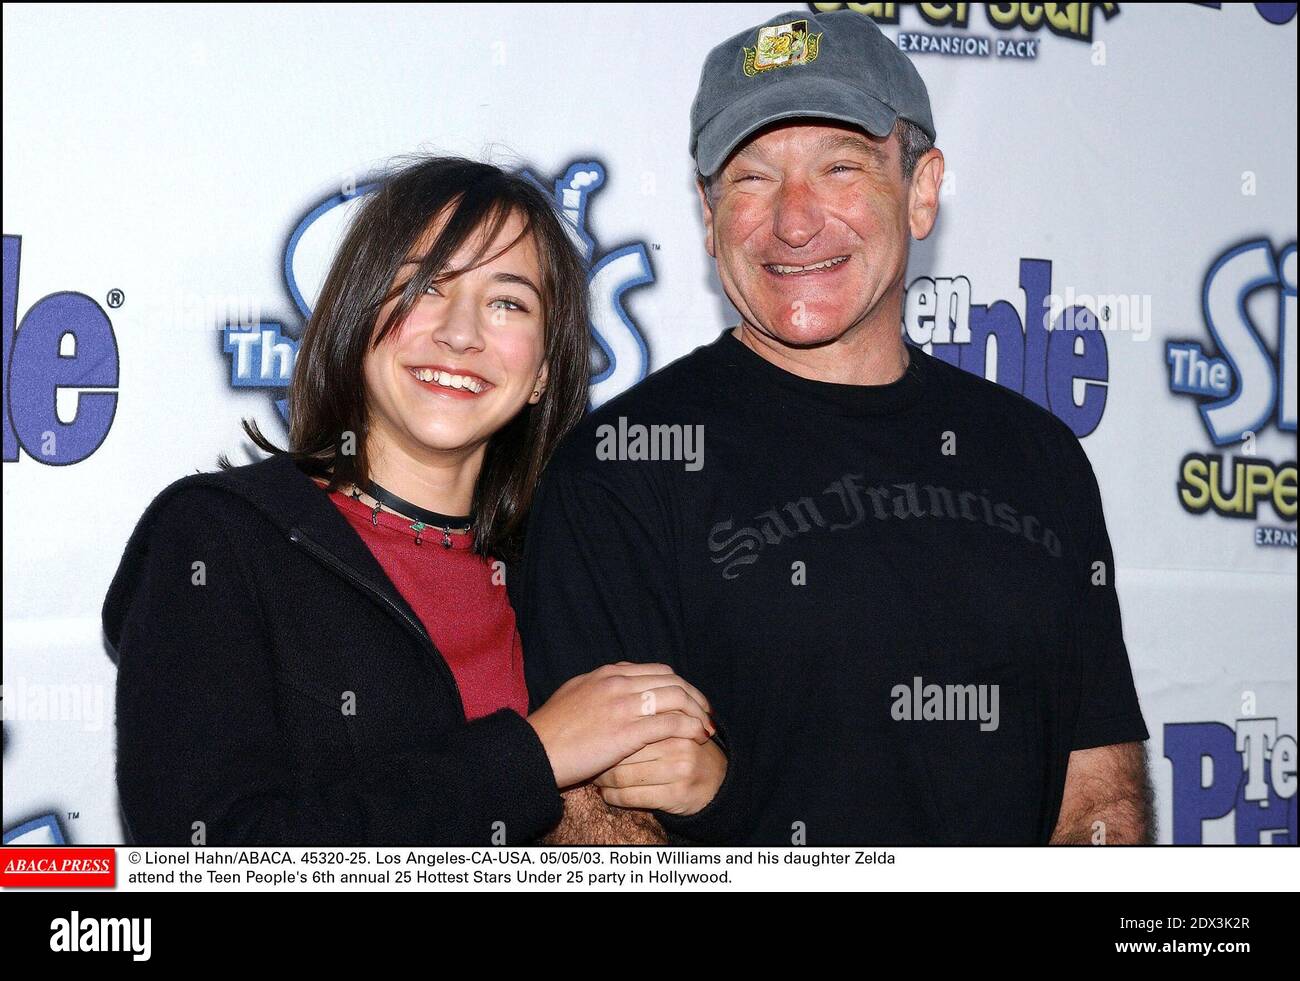 US actor Robin Williams has been found dead, aged 63, in an apparent suicide, California police say Monday August 11, 2014. Marin County Police said he was pronounced dead at his home shortly after officials responded to an emergency call around noon local time. Williams was famous for films such as Good Morning Vietnam and Dead Poets Society and won an Oscar for his role in Good Will Hunting; File photo : © Lionel Hahn/ABACA. 45320-25. Los Angeles-CA-USA. 05/05/03. Robin Williams and his daughter Zelda attend the Teen People's 6th annual 25 Hottest Stars Under 25 party in Hollywood. Stock Photo